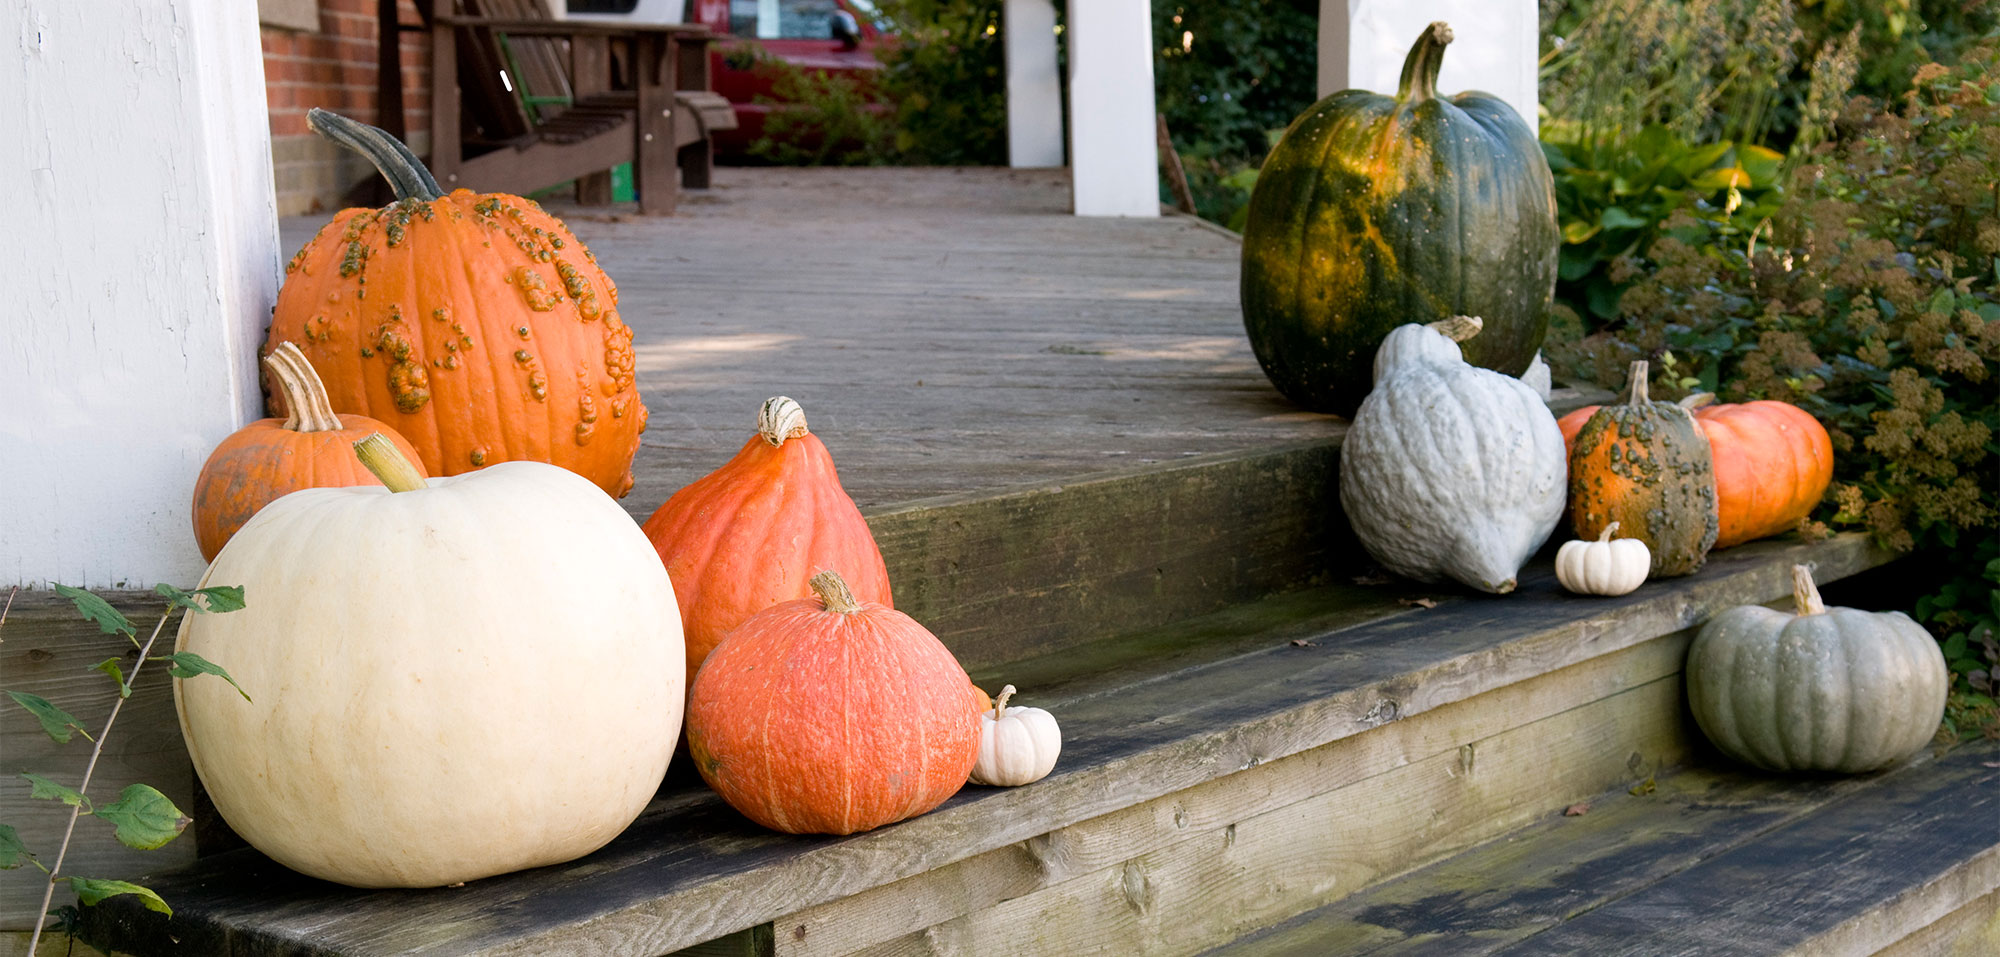 Variety of different kinds of pumpkins